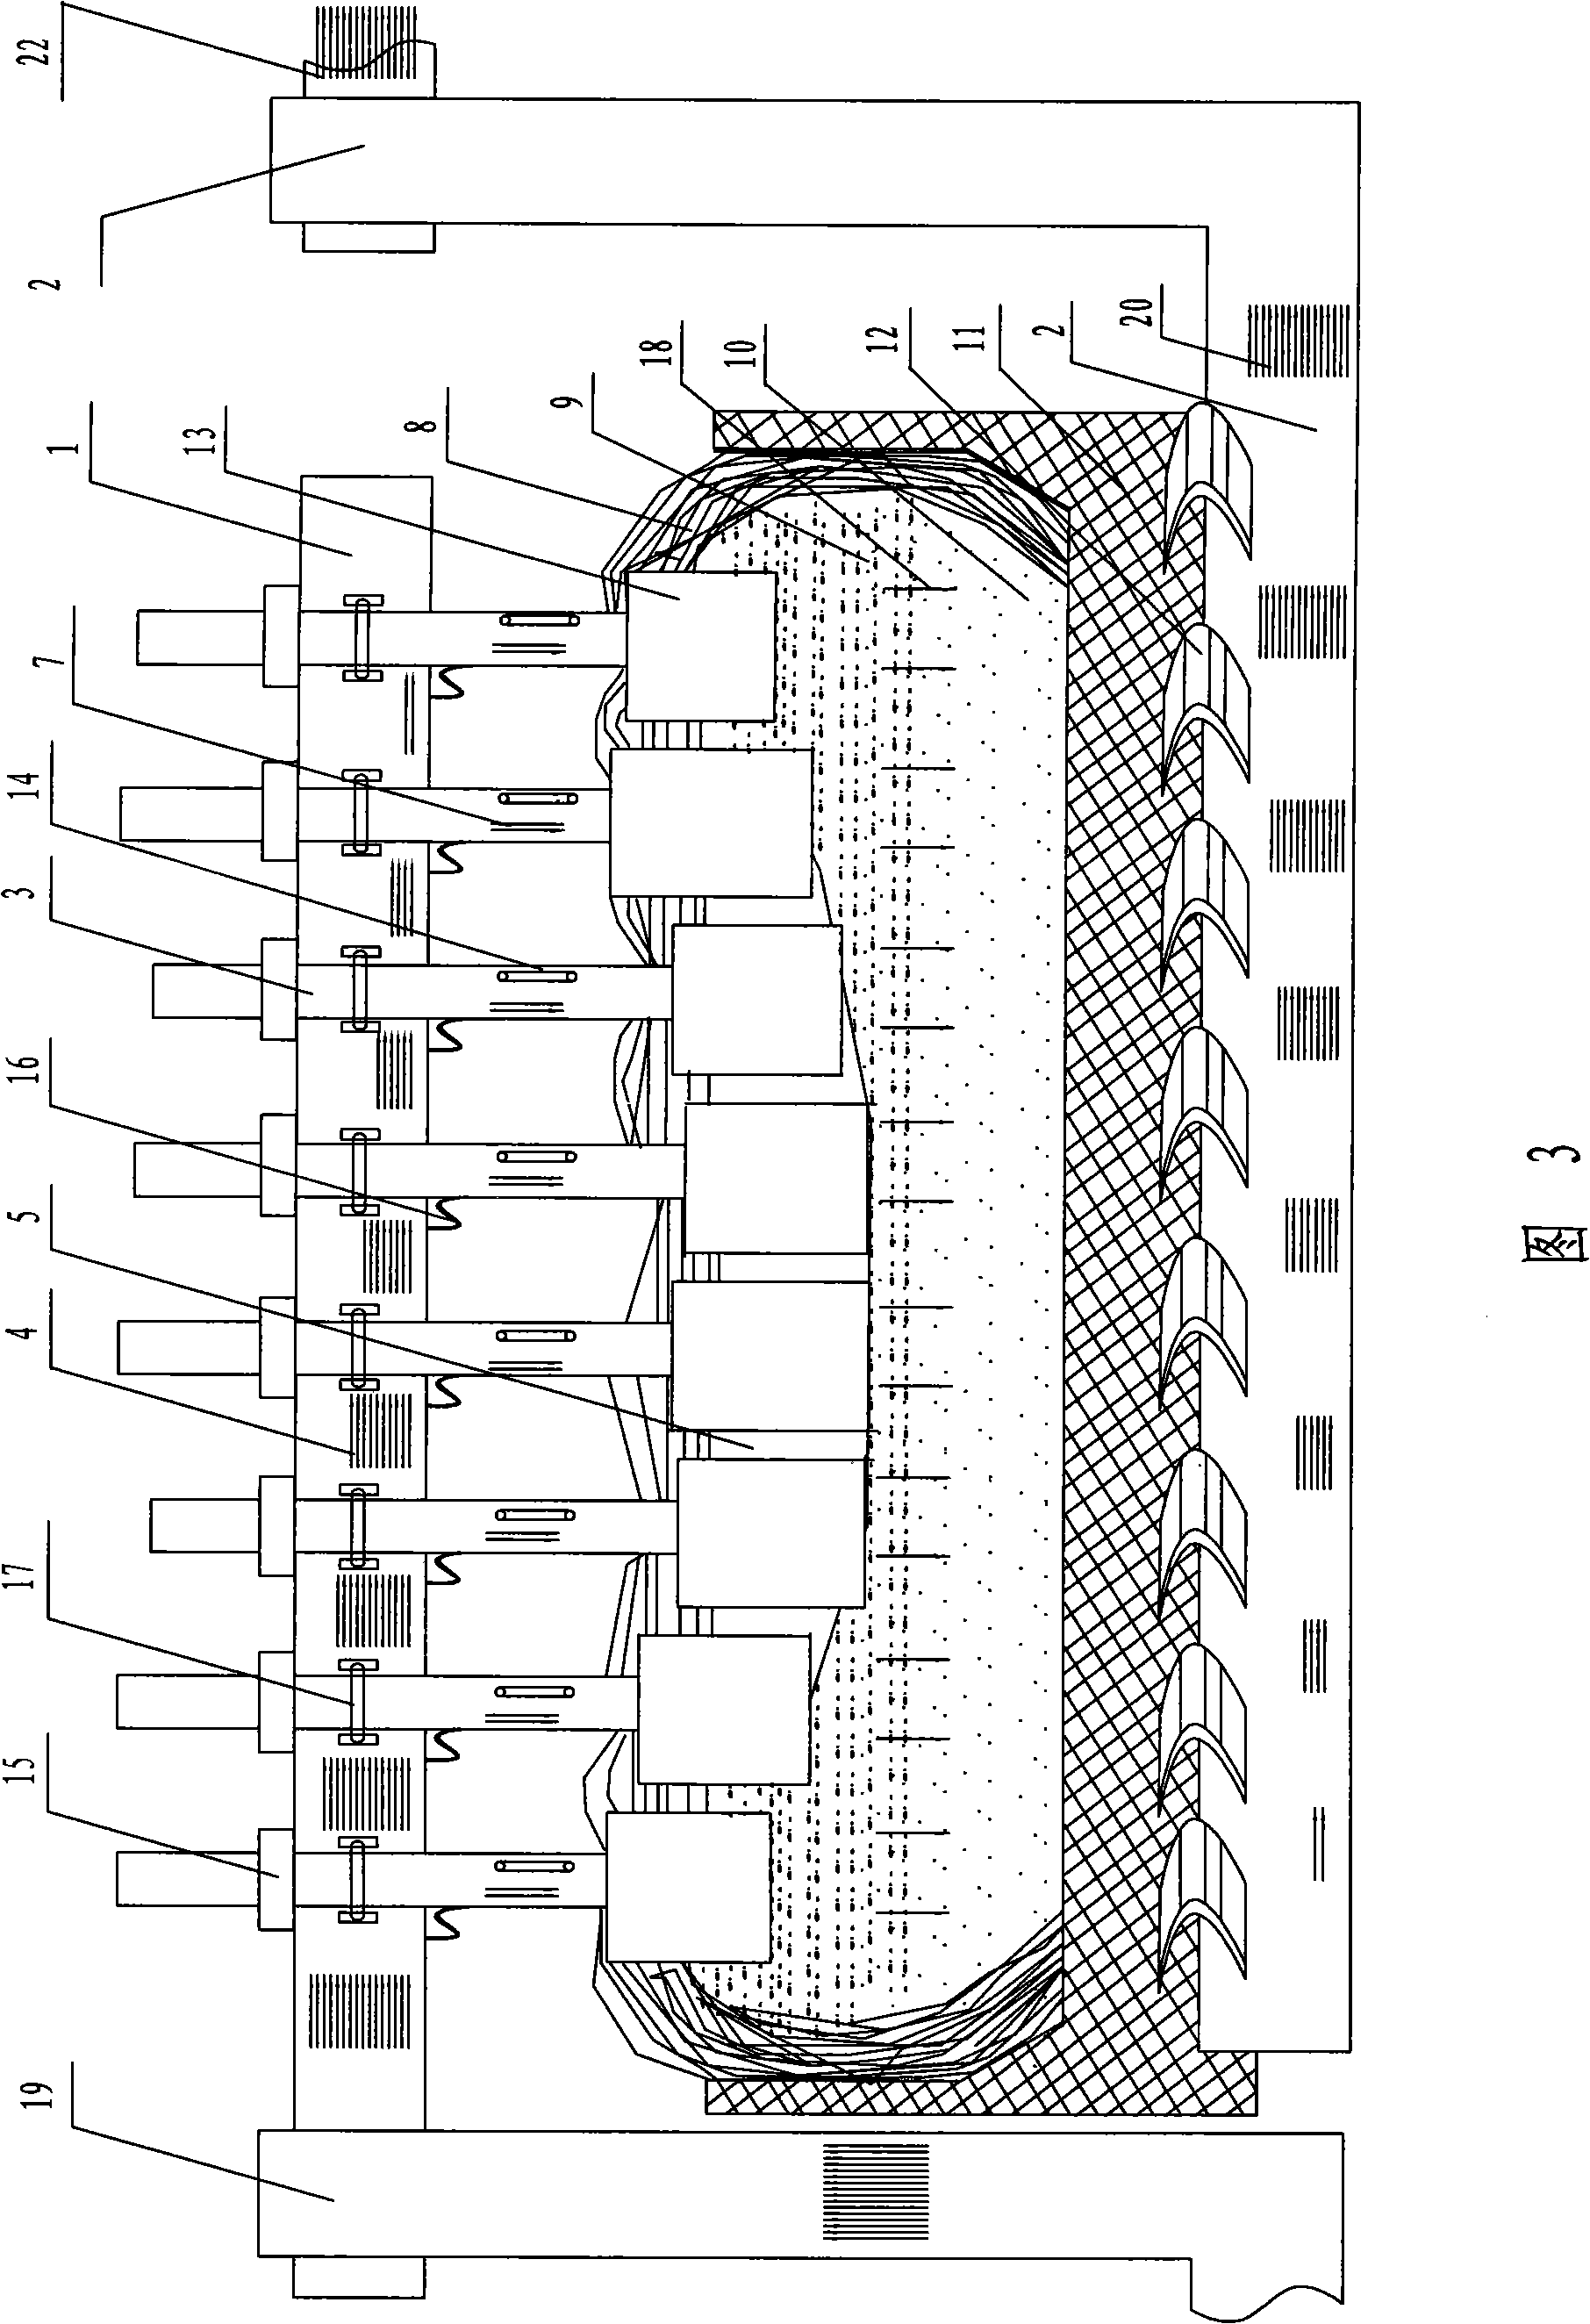 Single anode shunt and regulation apparatus electrolyzed by multiple anodes cell and method